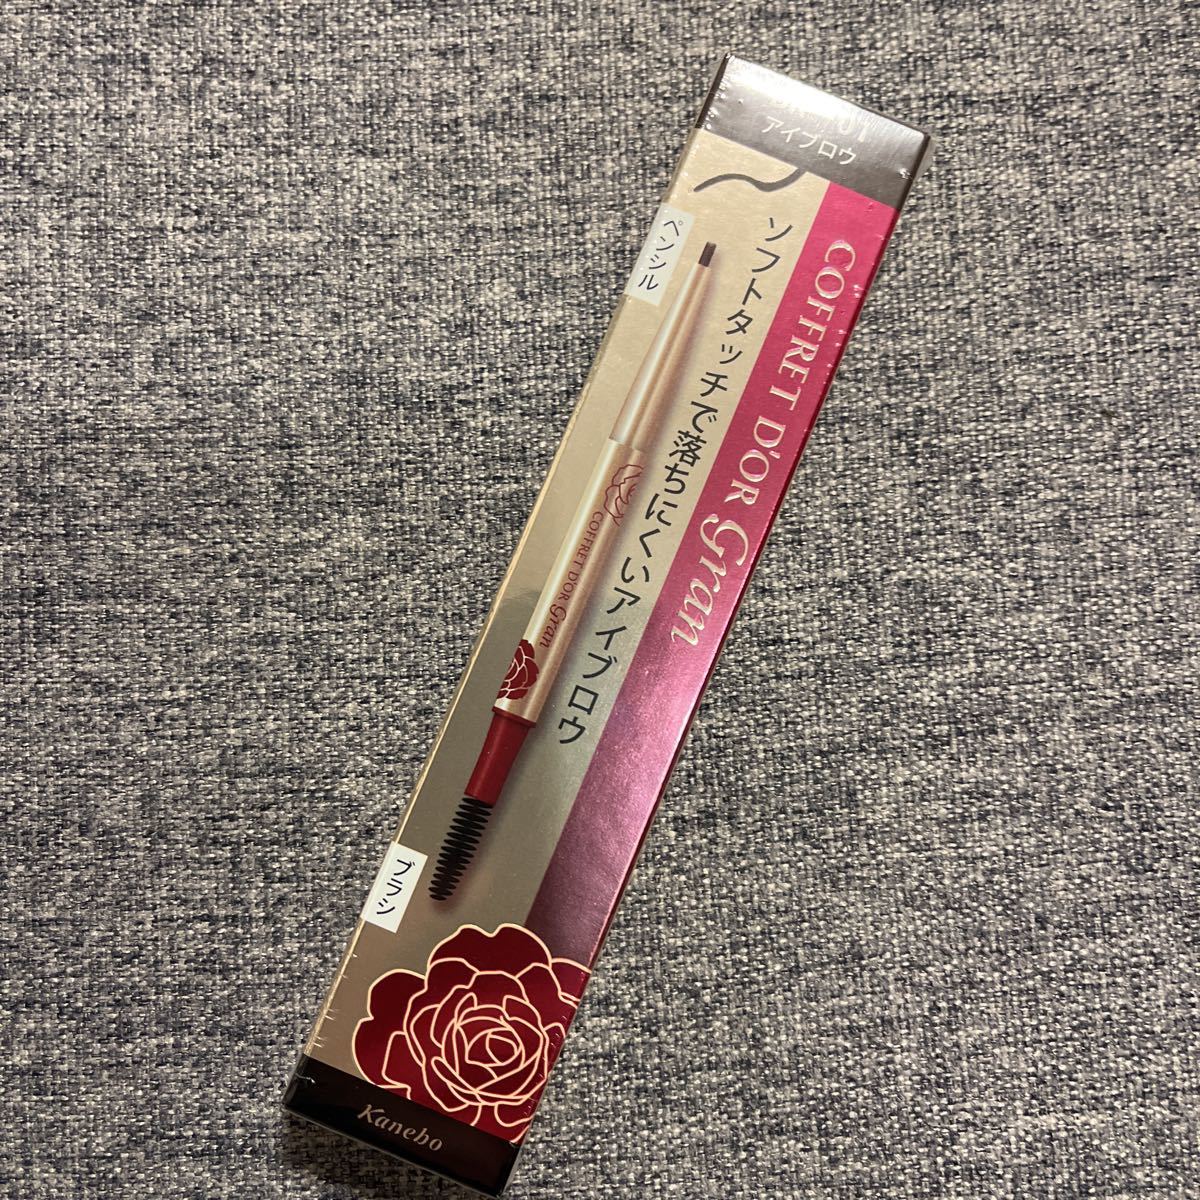  including carriage! Coffret d'Or gran soft pen sill eyebrows ( body ) (BR-01 Brown ) Kanebo tea .